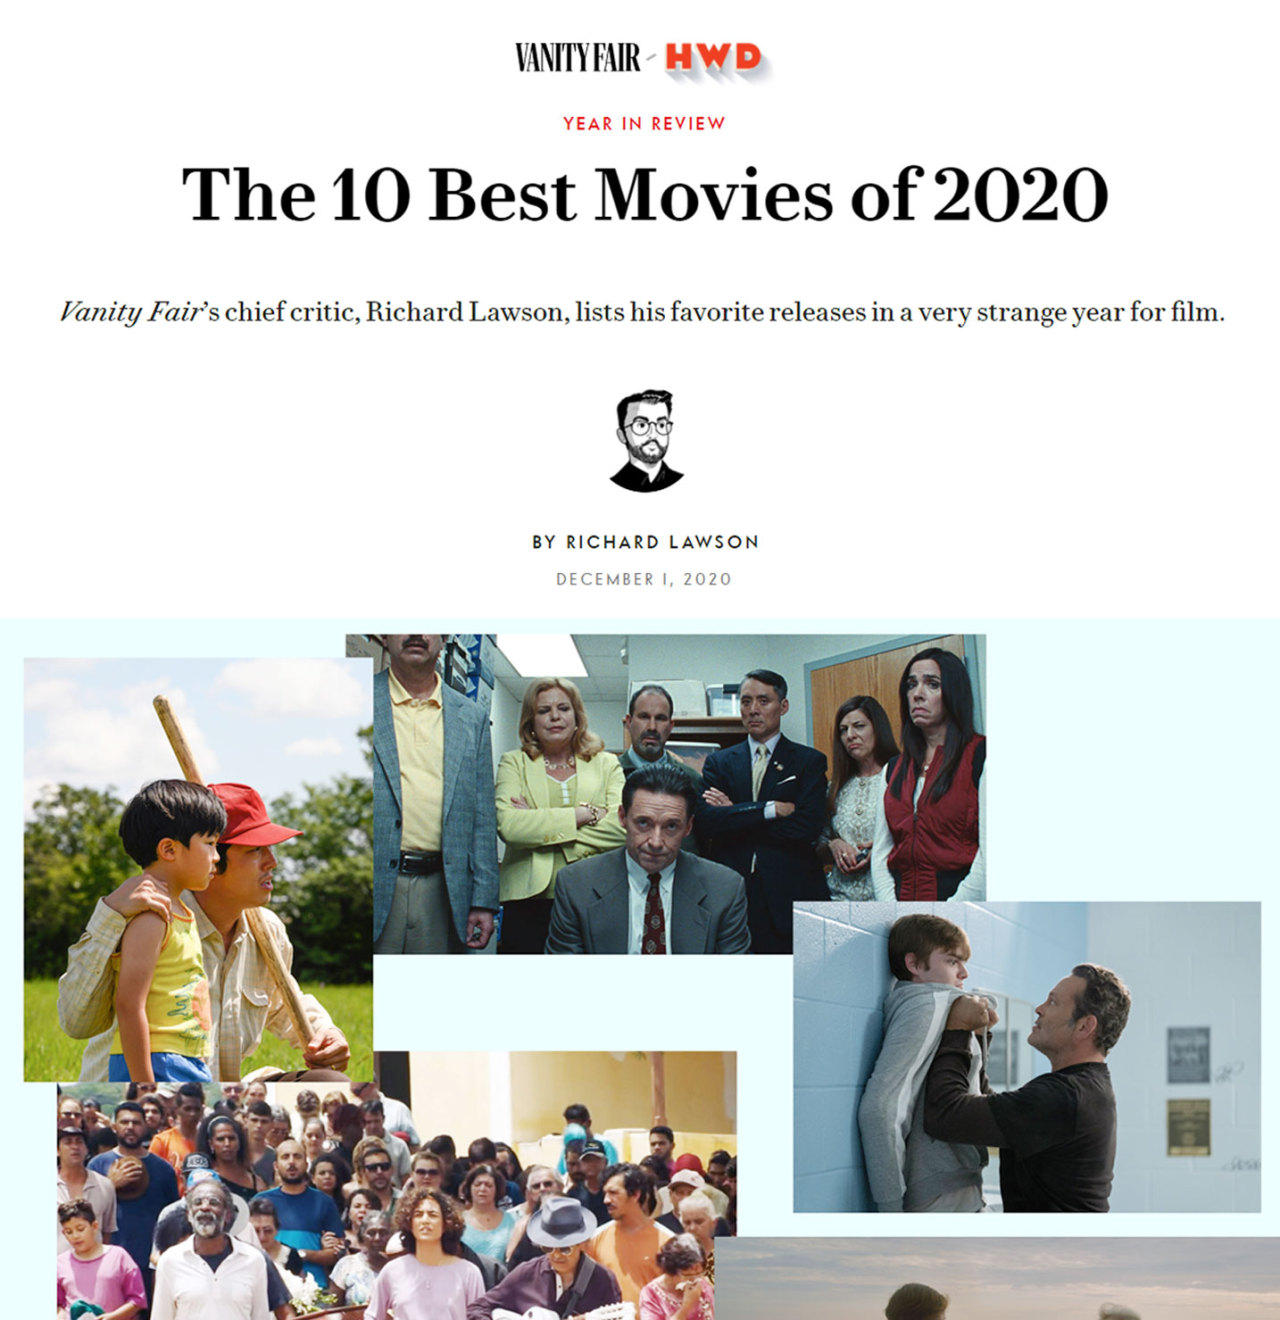 “Minari” by director Lee Isaac Chung is selected among the “10 Best Movies of 2020” by Vanity Fair. (Vanity Fair)